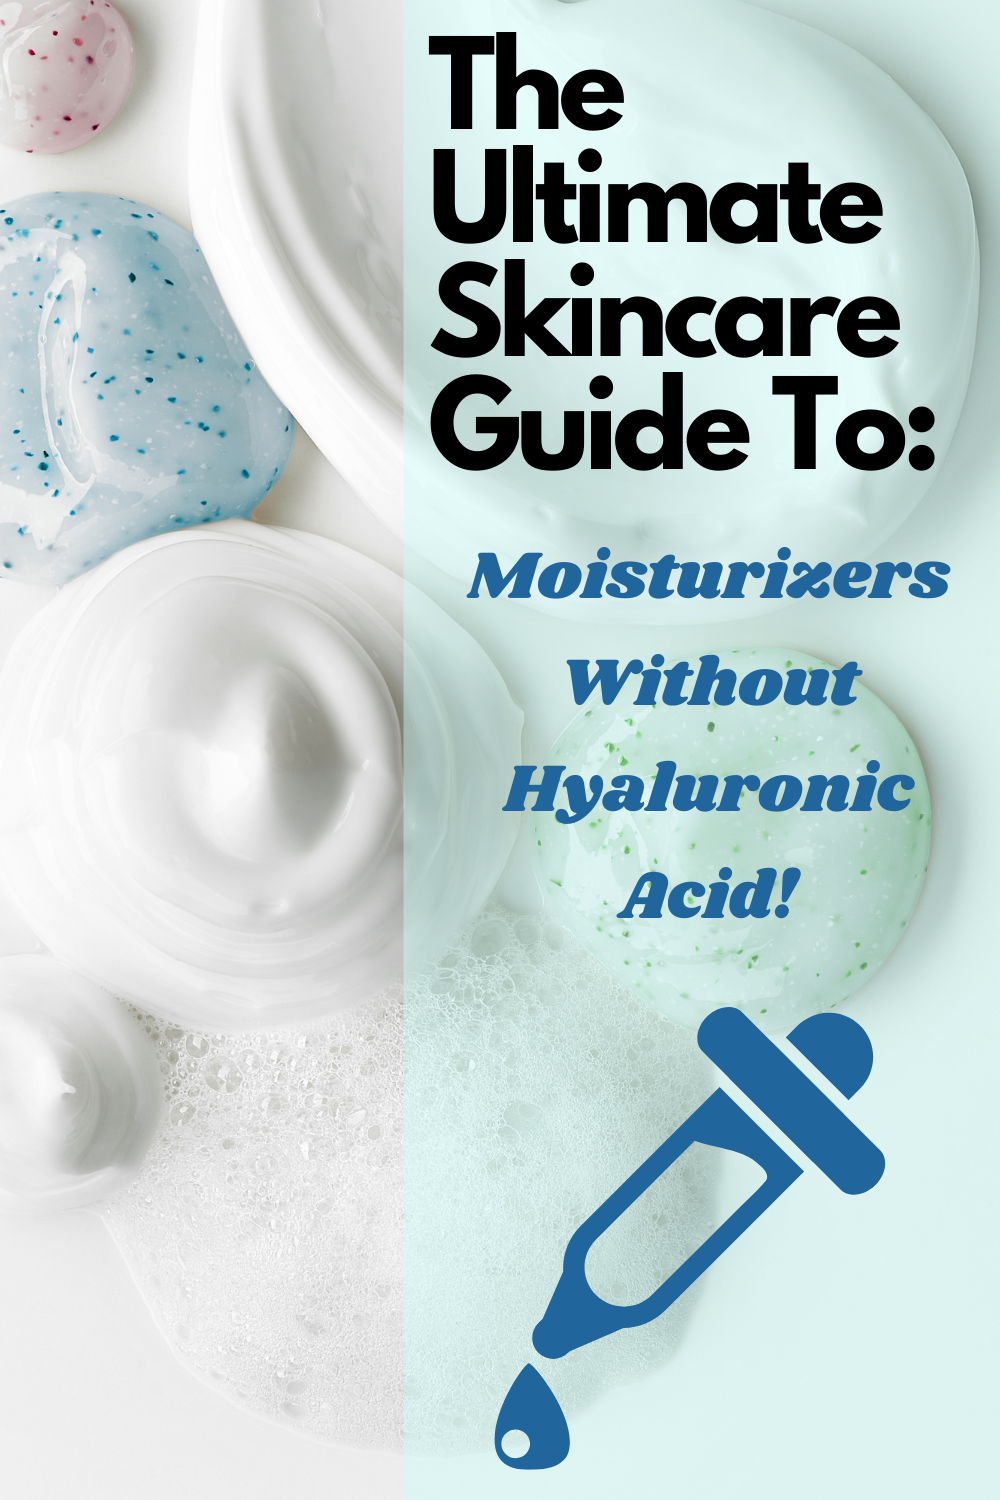 The Ultimate Guide to Moisturizers without Hyaluronic Acid